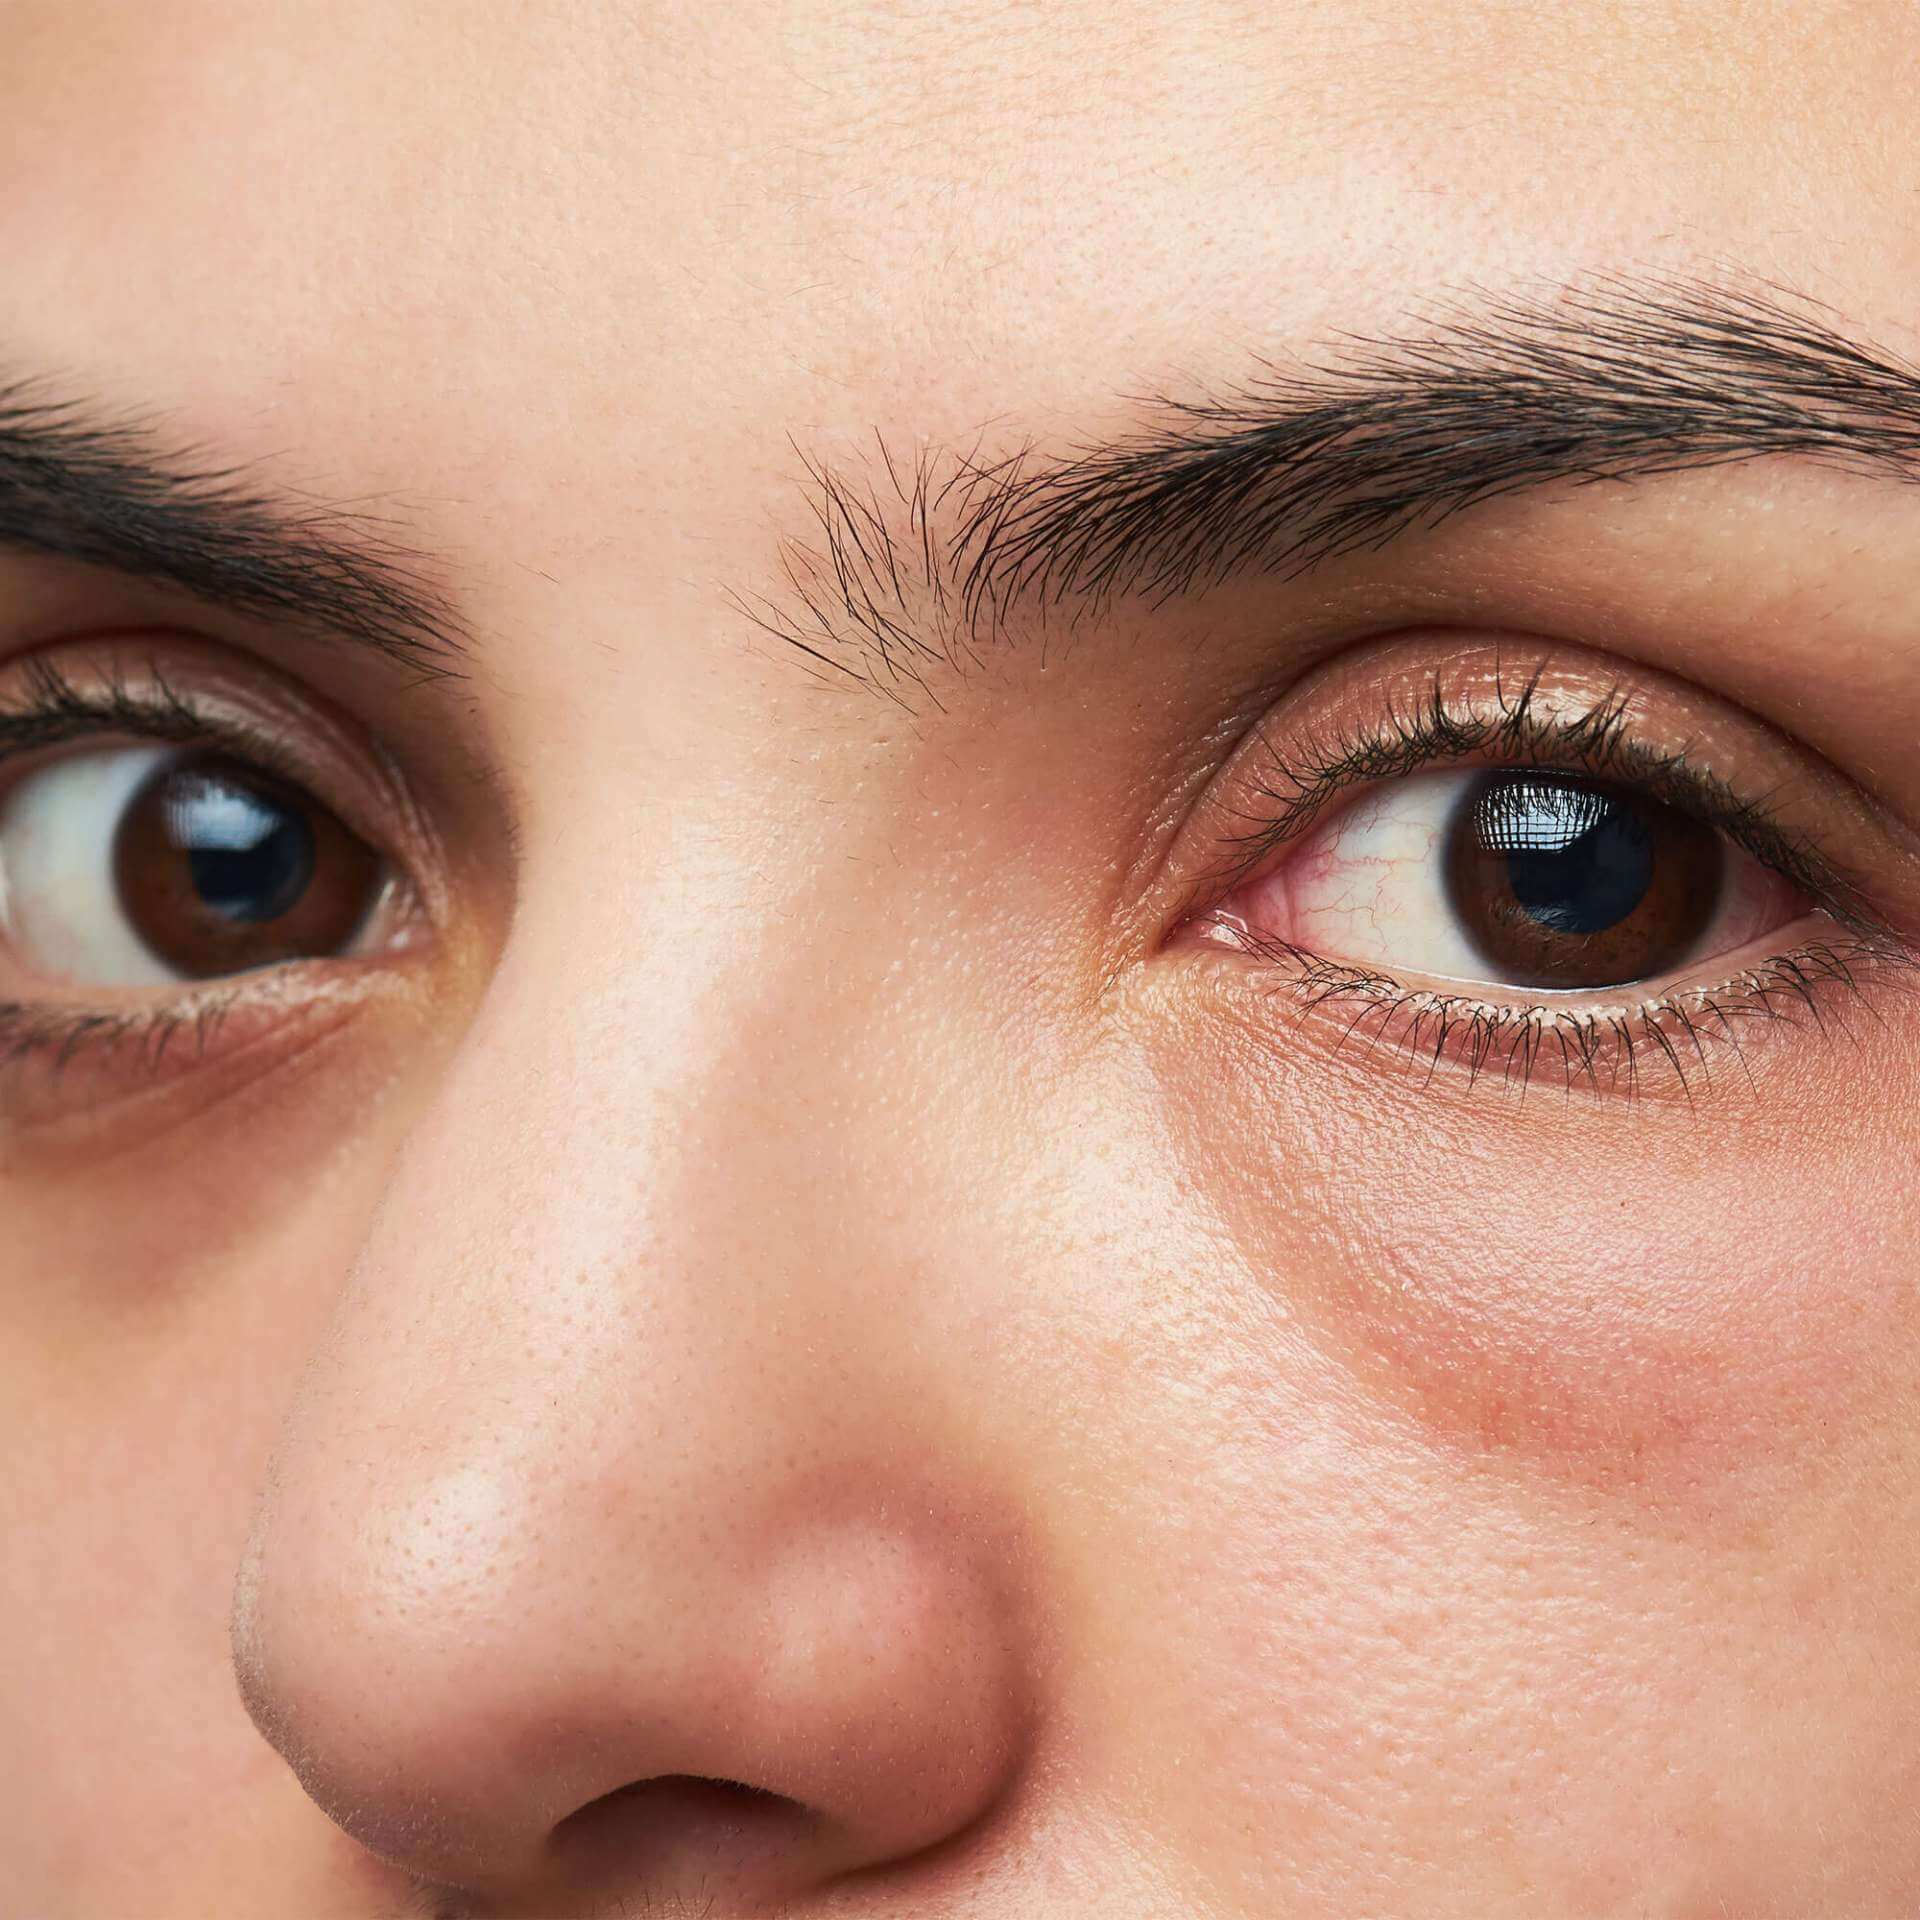 Bags under eyes - Diagnosis and treatment - Mayo Clinic